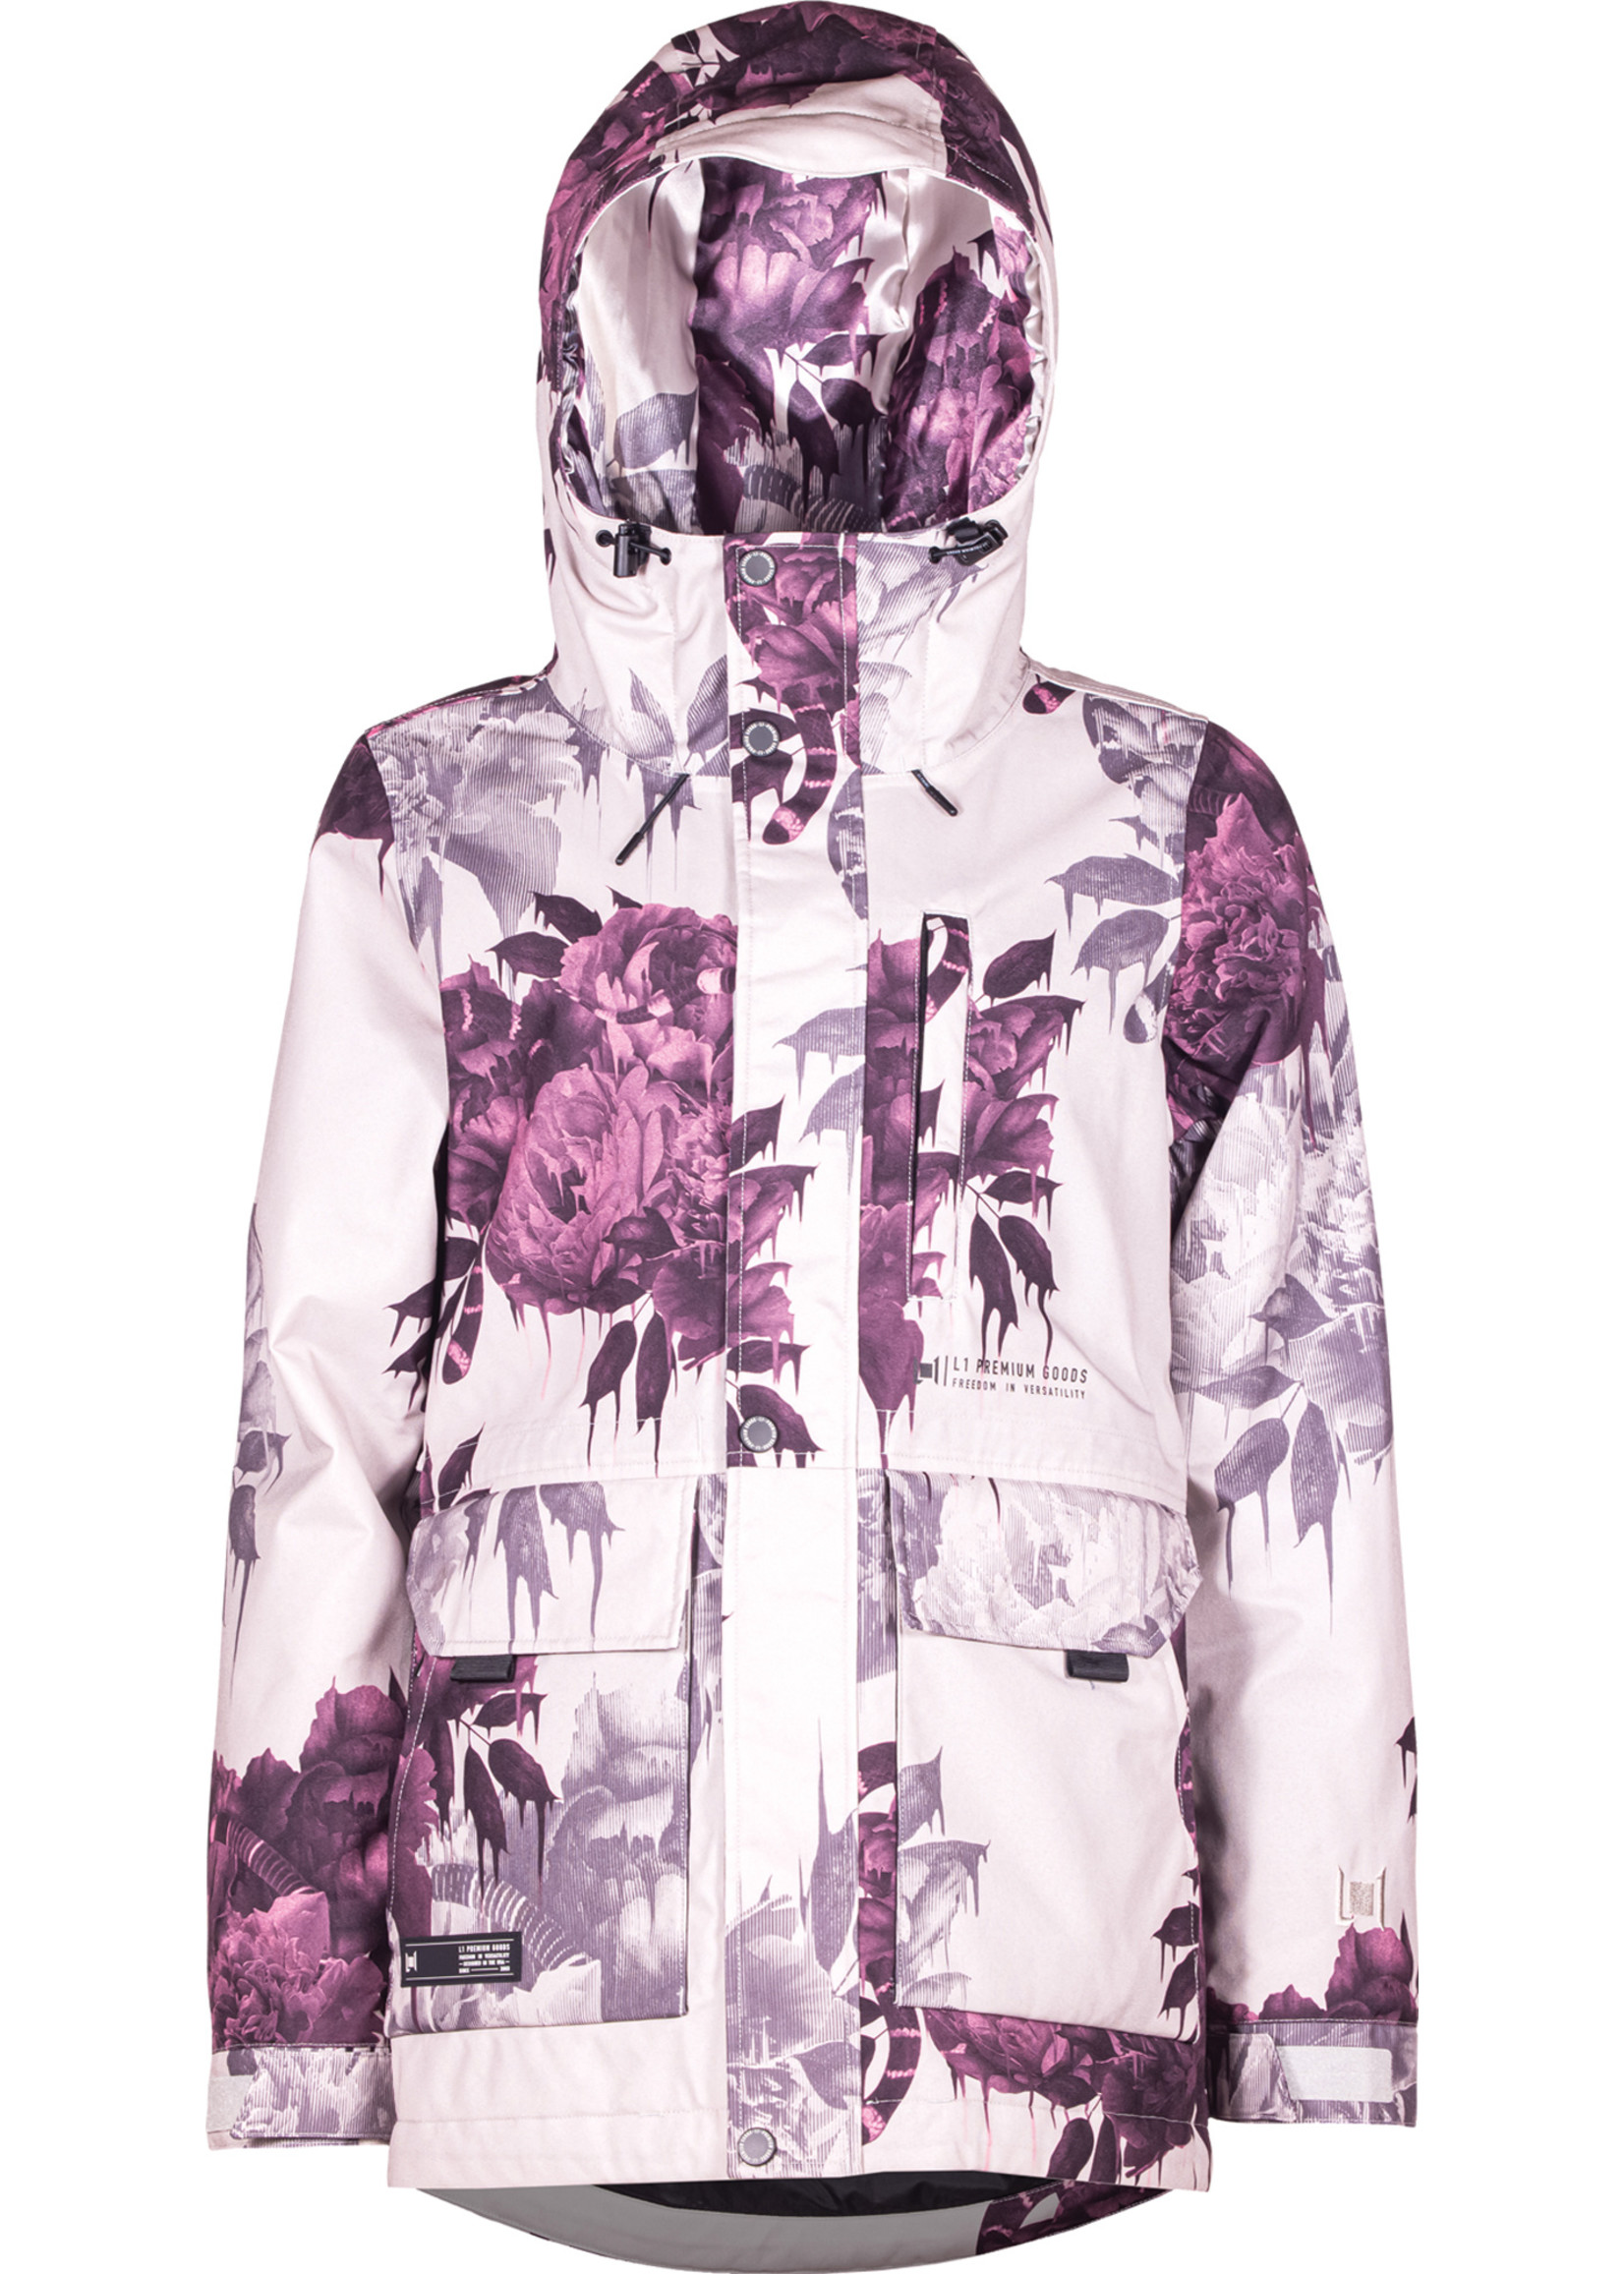 L1 Anwen Jacket - Ghosted Print